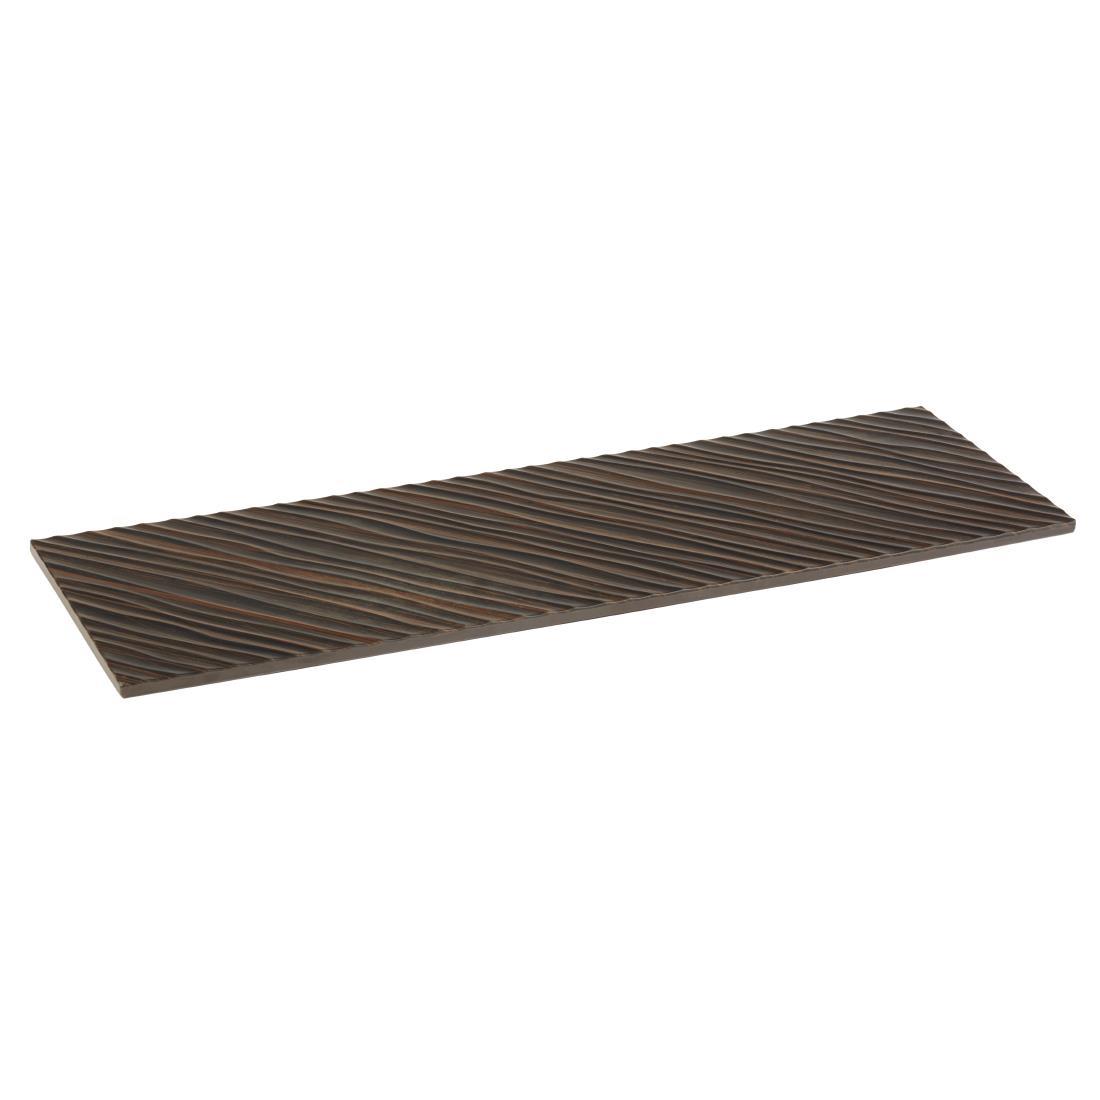 APS+ Tiles Tray Brown GN2/4 - Each - DT750 - 1